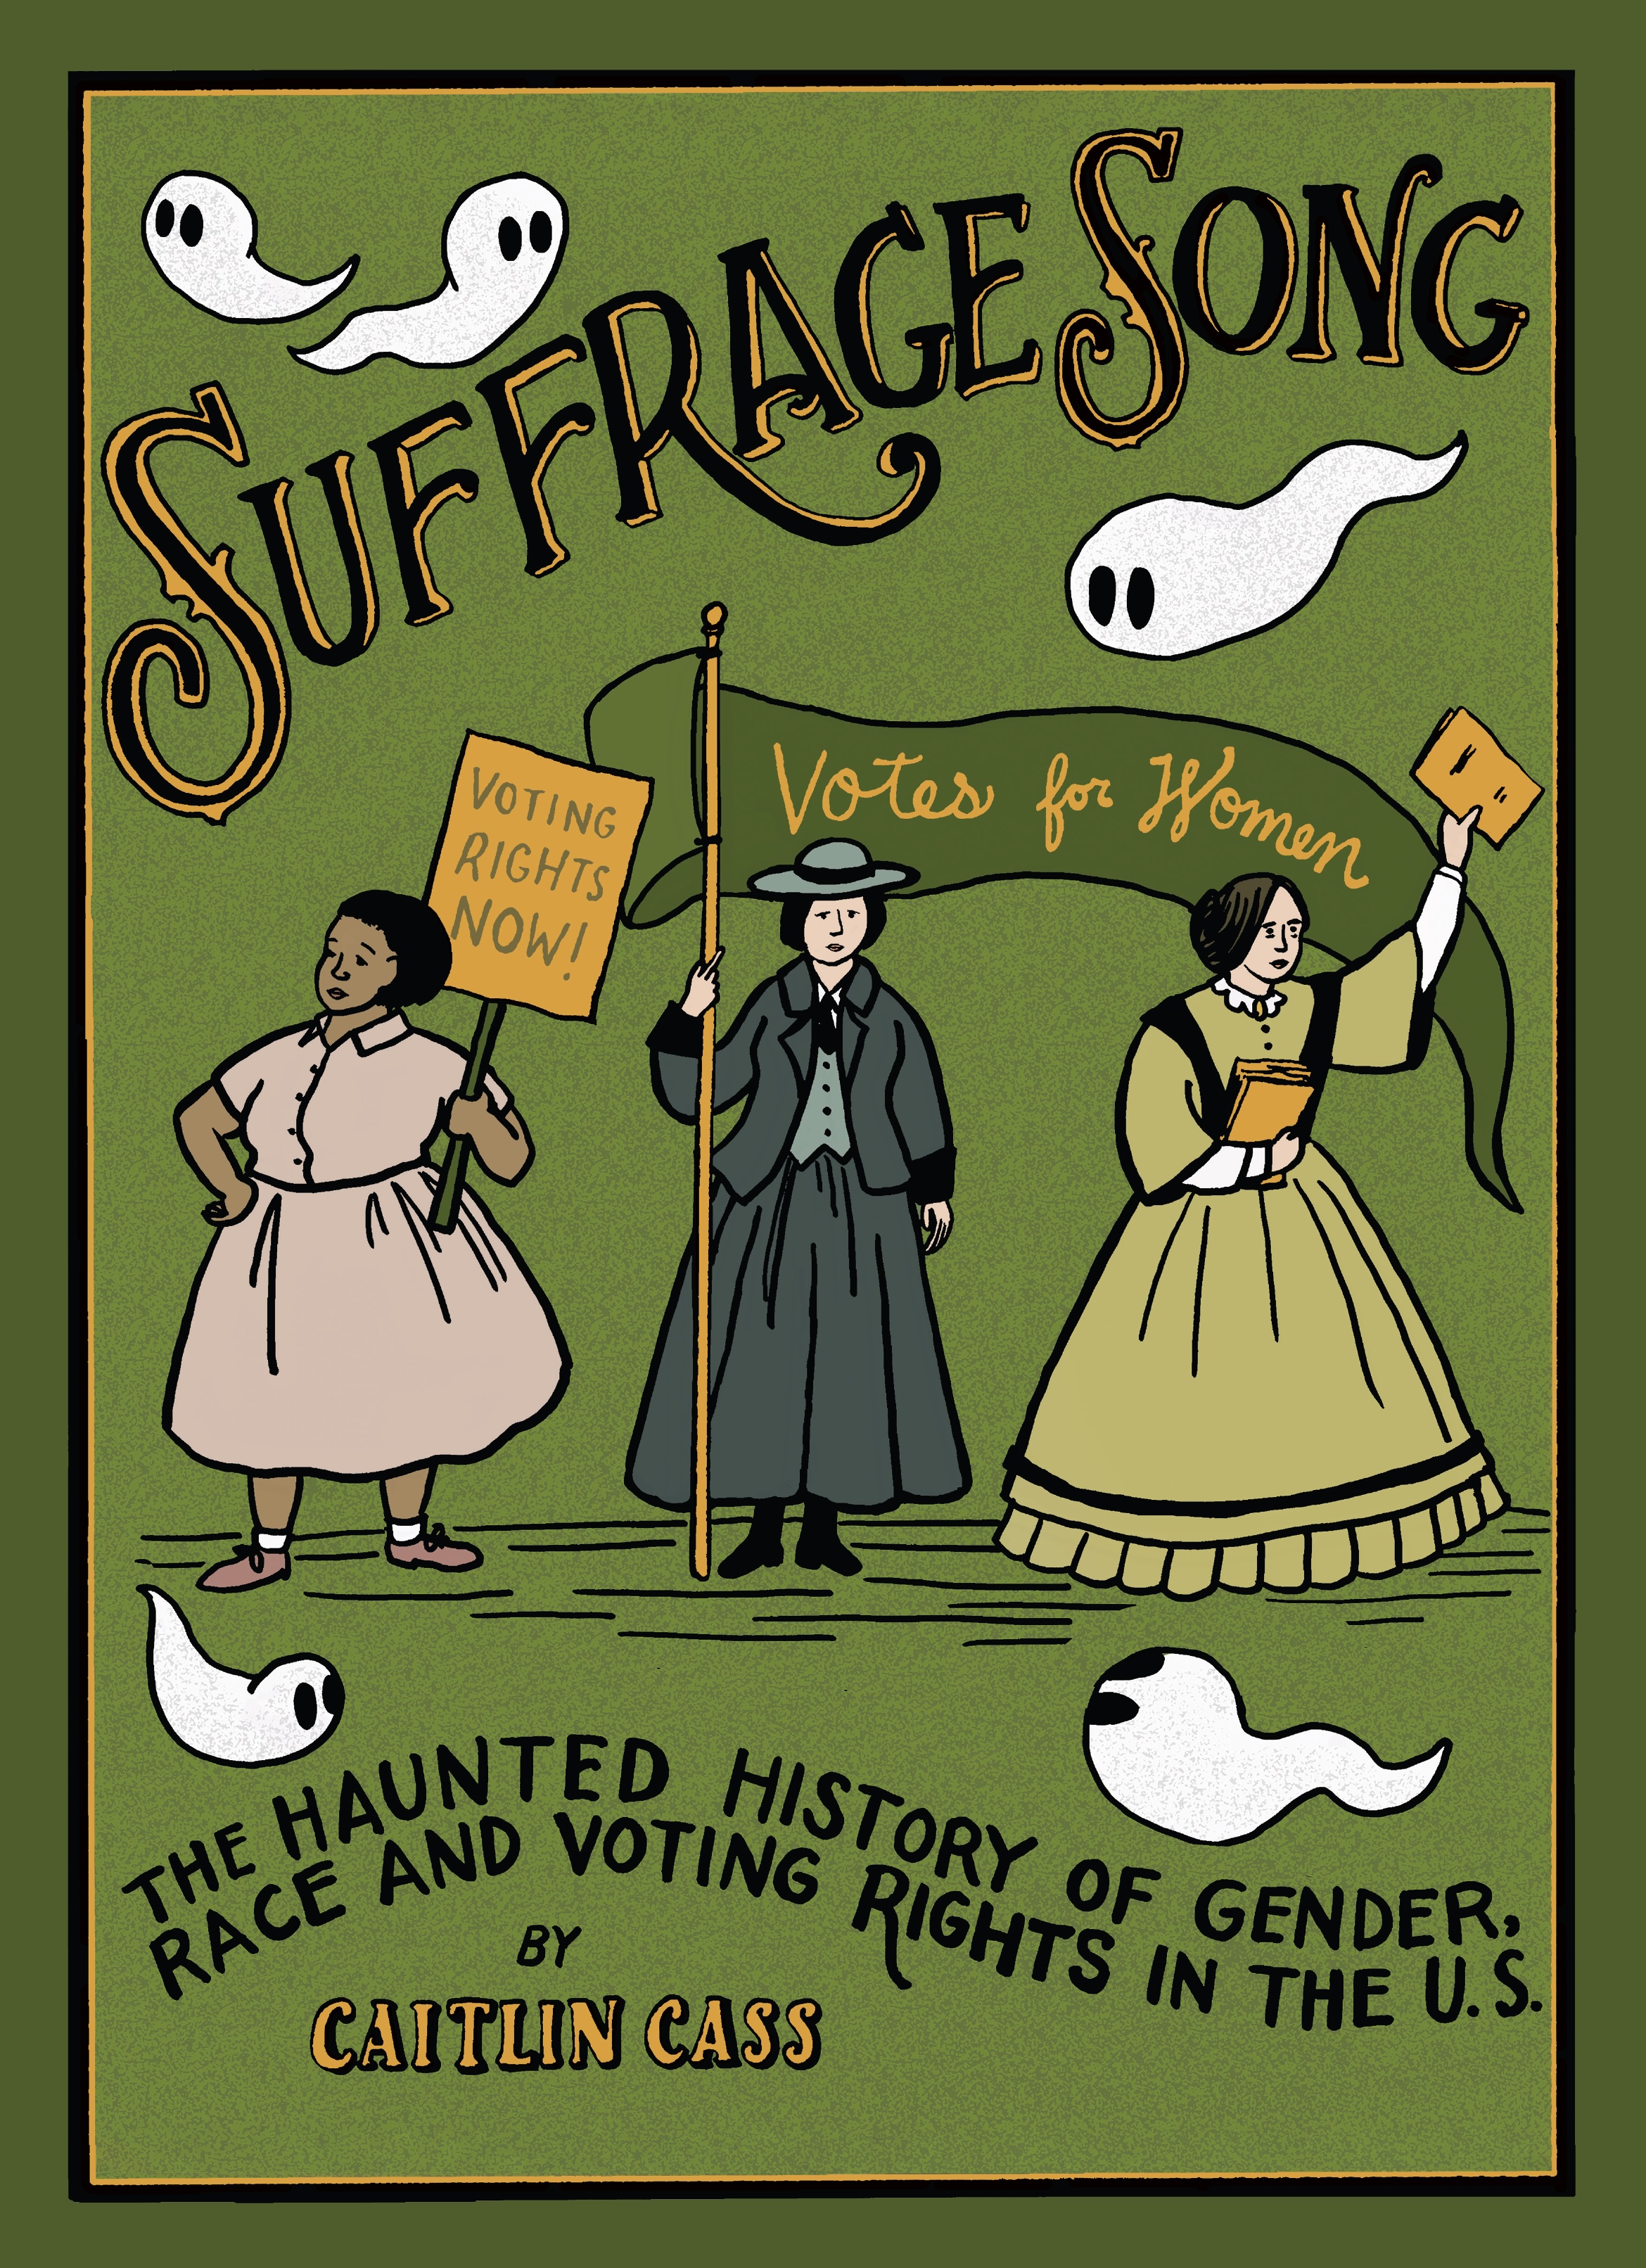 Suffrage Song Hardcover: The Haunted History of Gender Race and Voting Rights in the US (Mature)